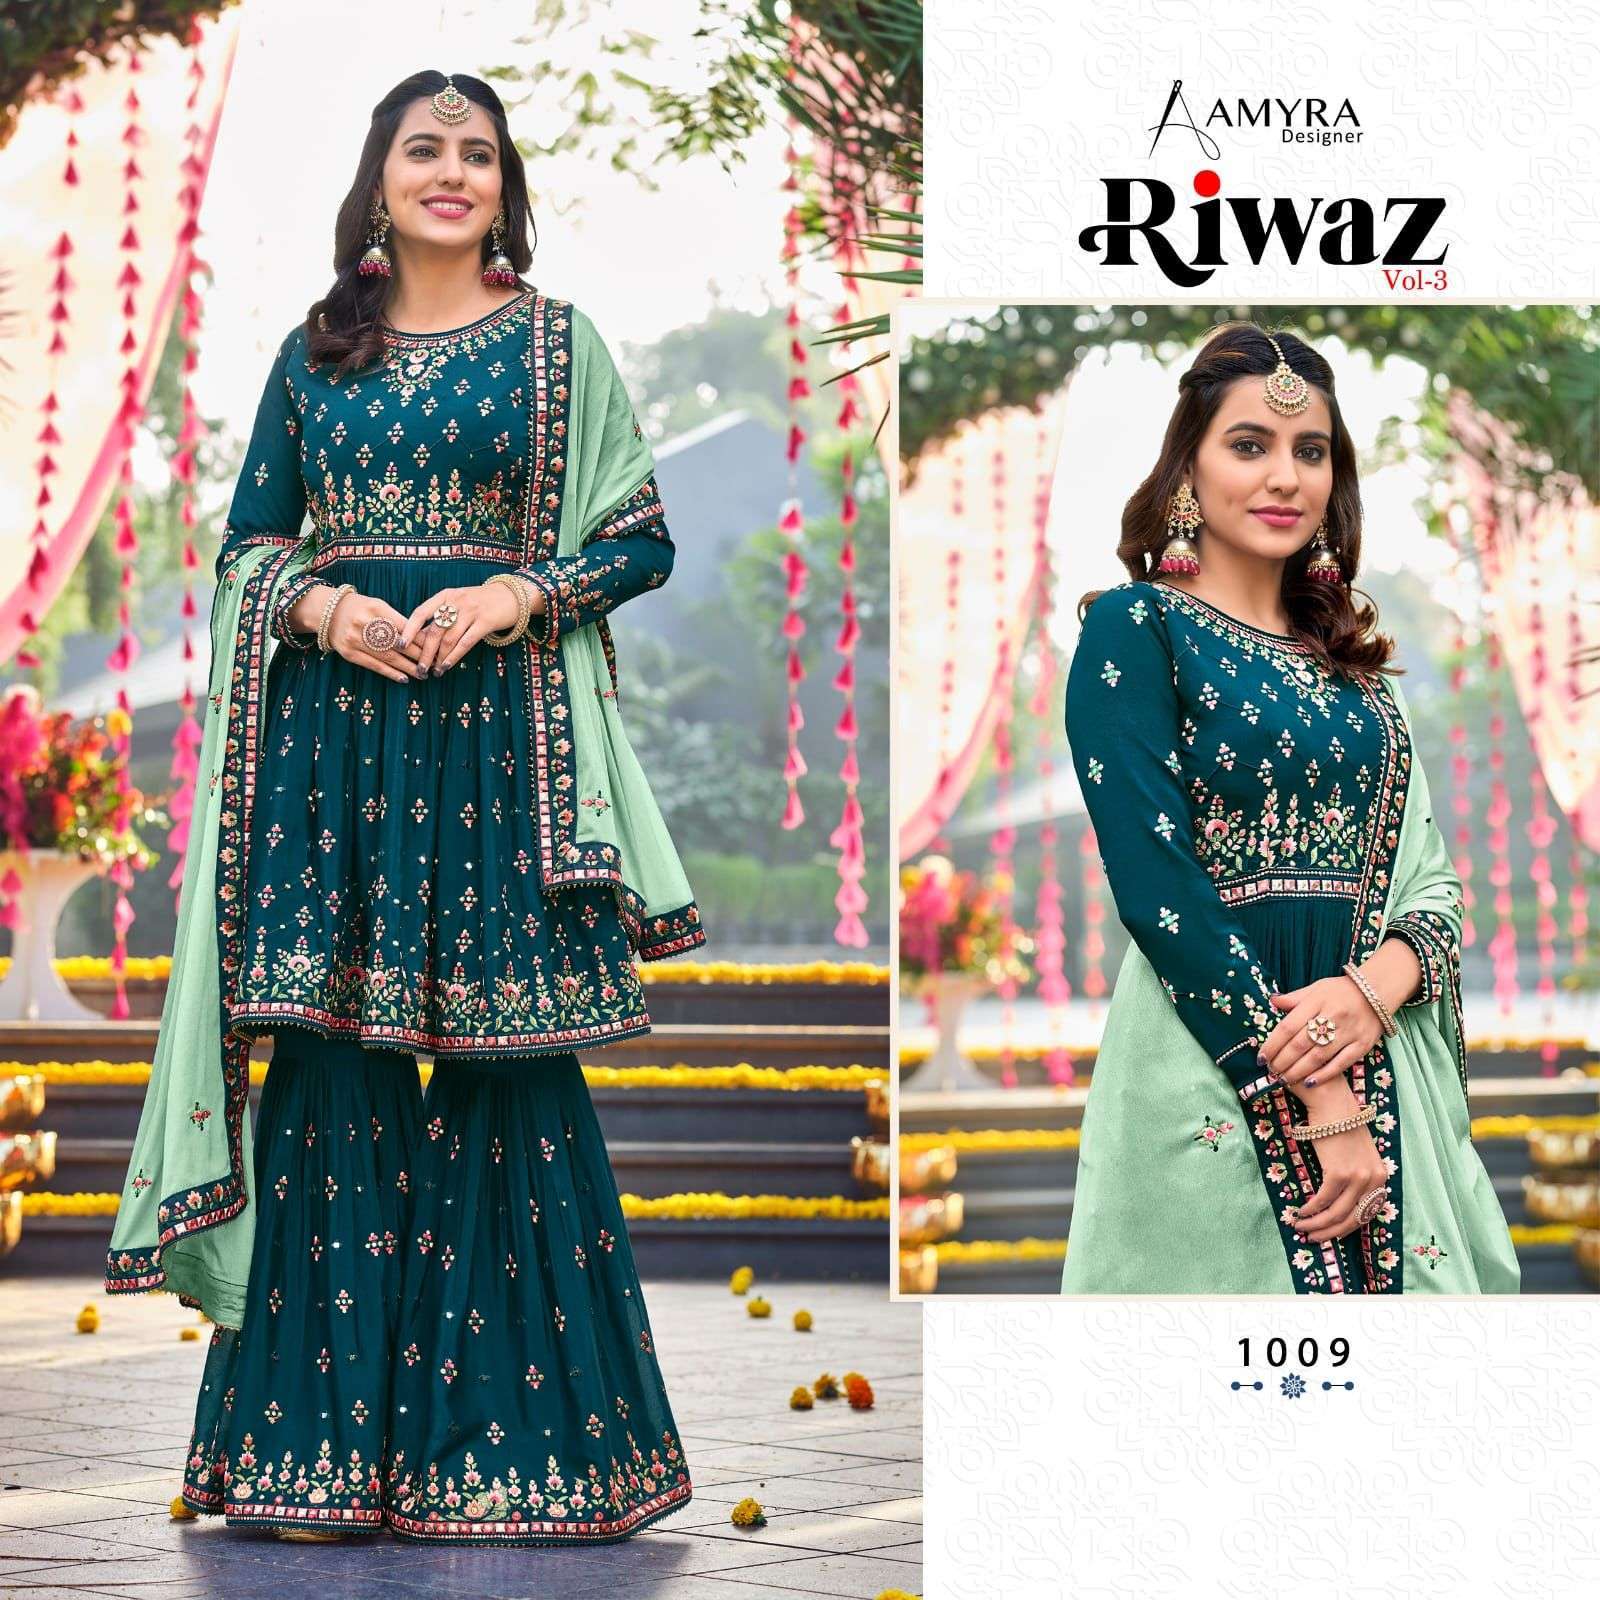  AMYRA RIWAZ VOL 3 READYMADE TOP WITH PLAZZO & DUPATTA COLLECTION